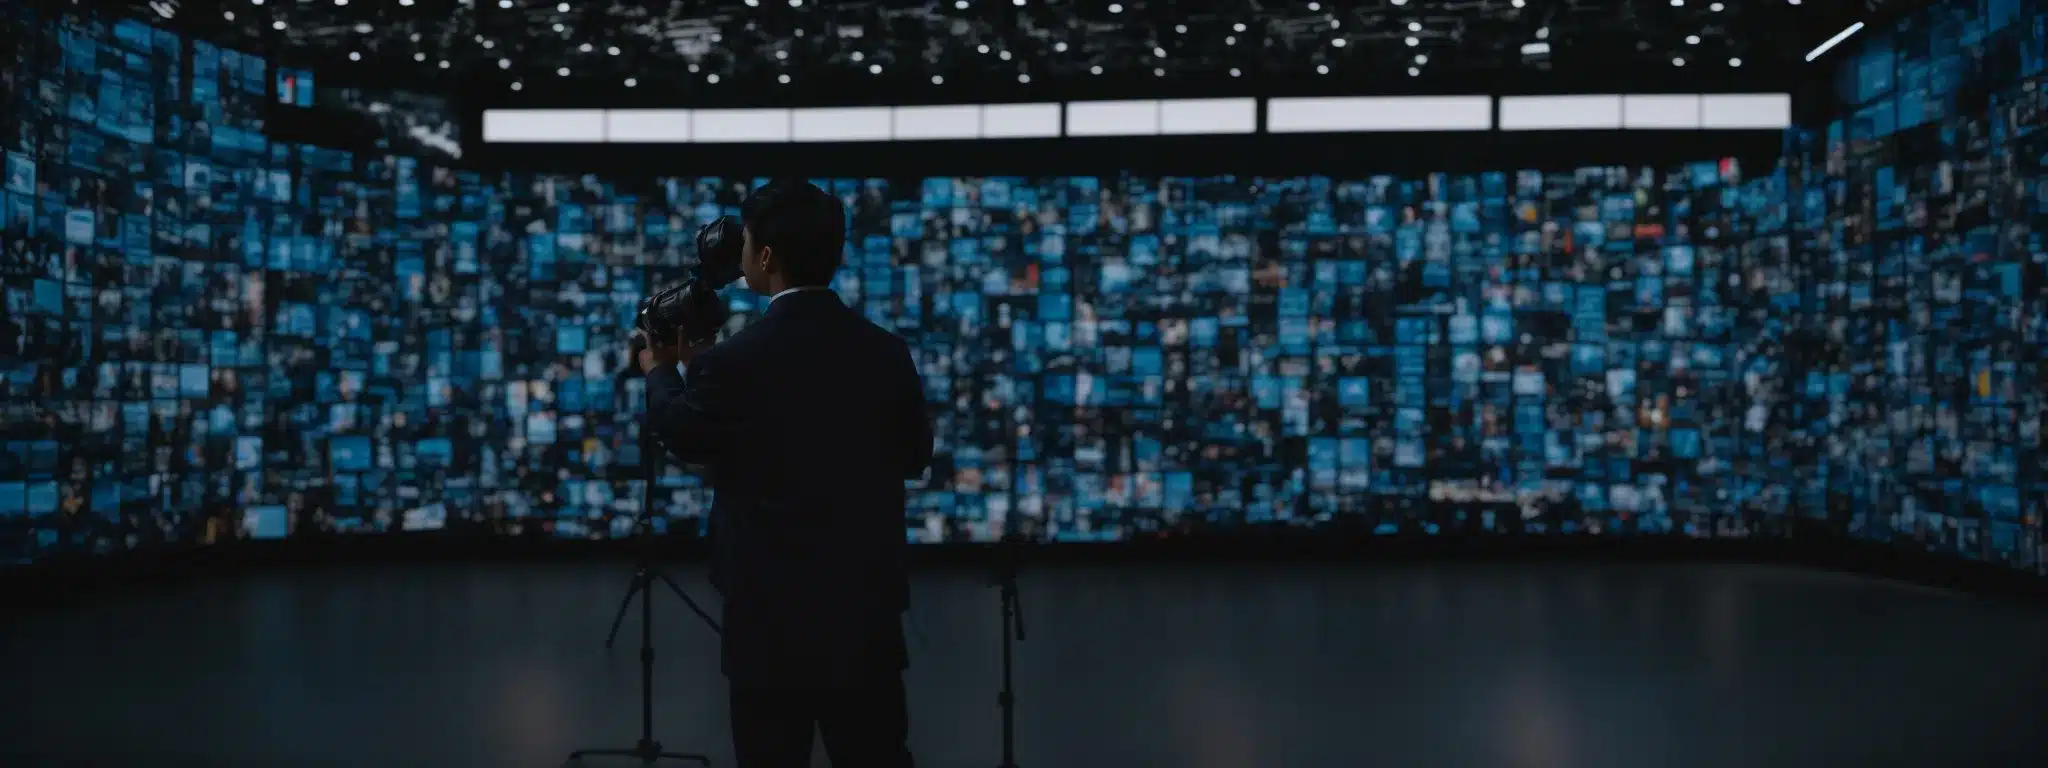 A Person With A Megaphone Standing Against A Backdrop Of Digital Screens Displaying Various Social Media Icons.